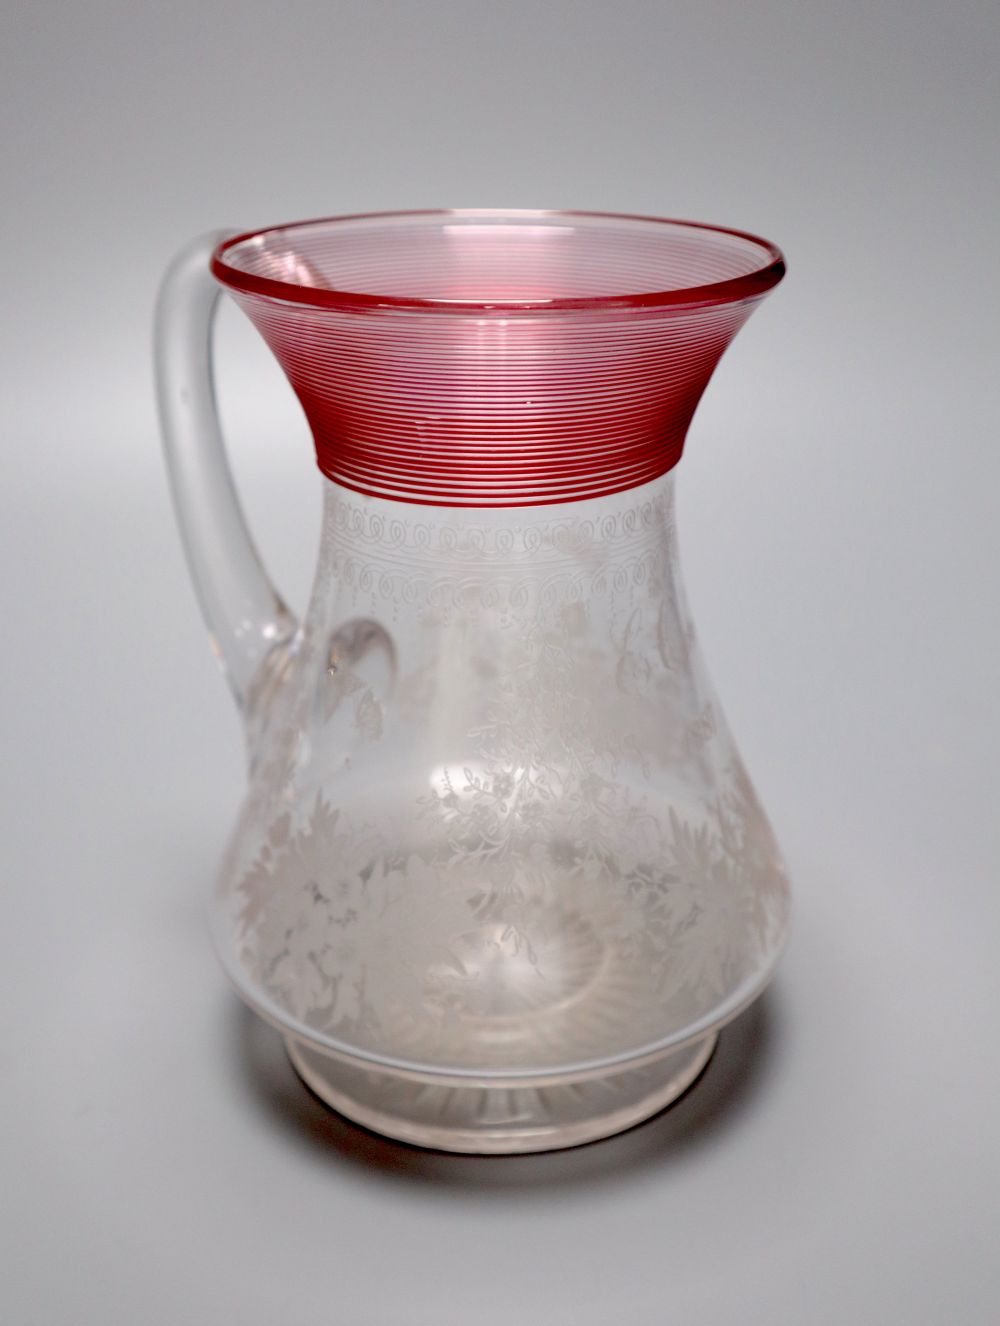 A Victorian 'E. Oakes 1887' etched commemorative jug, with red trailing to the neck, 16.5cm